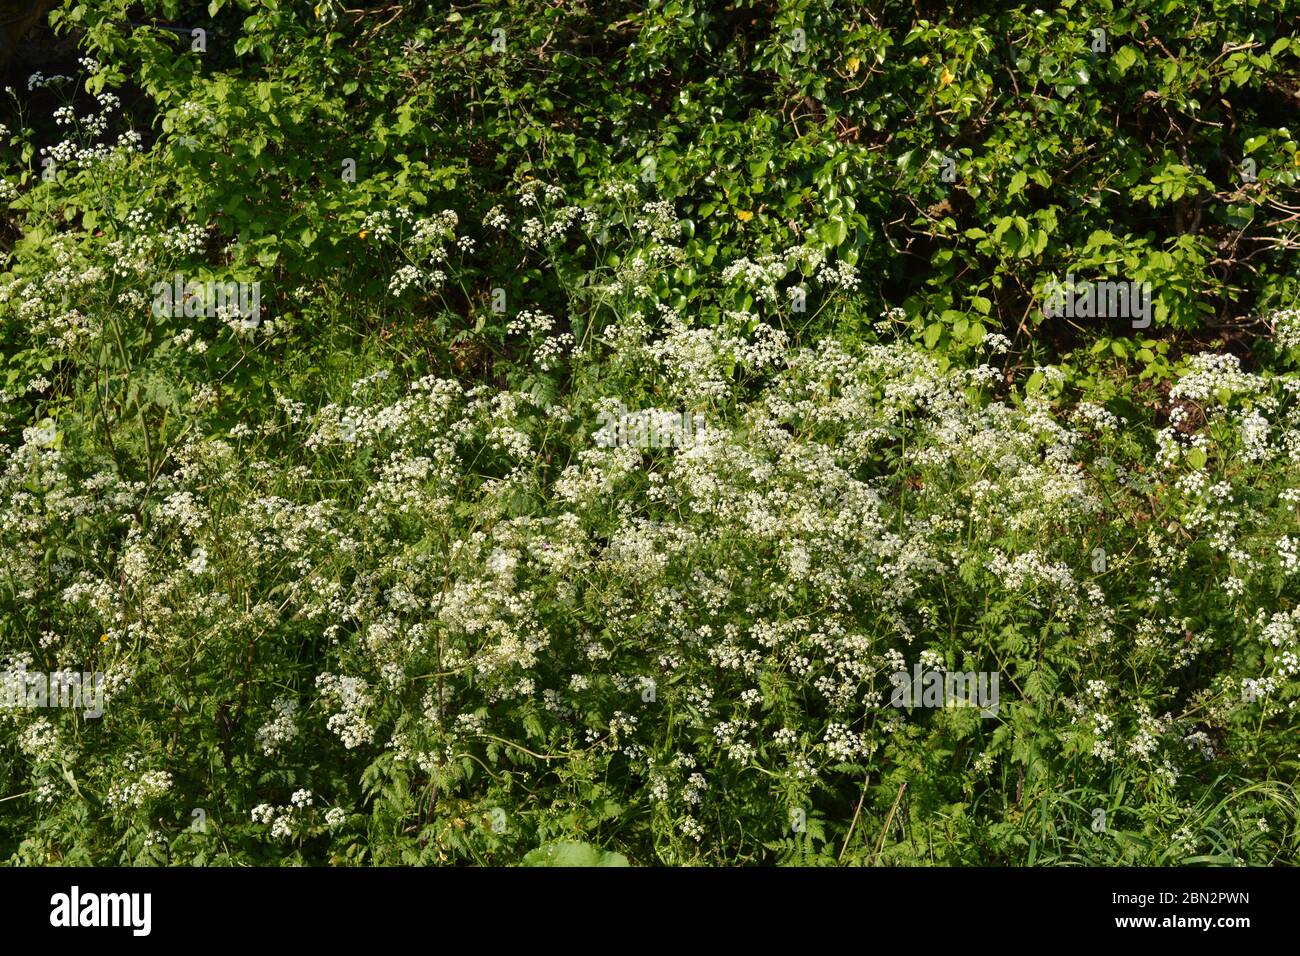 Cow parsley, also known as  Anthriscus sylvestris, growing in a British hedgerow in early summer Stock Photo